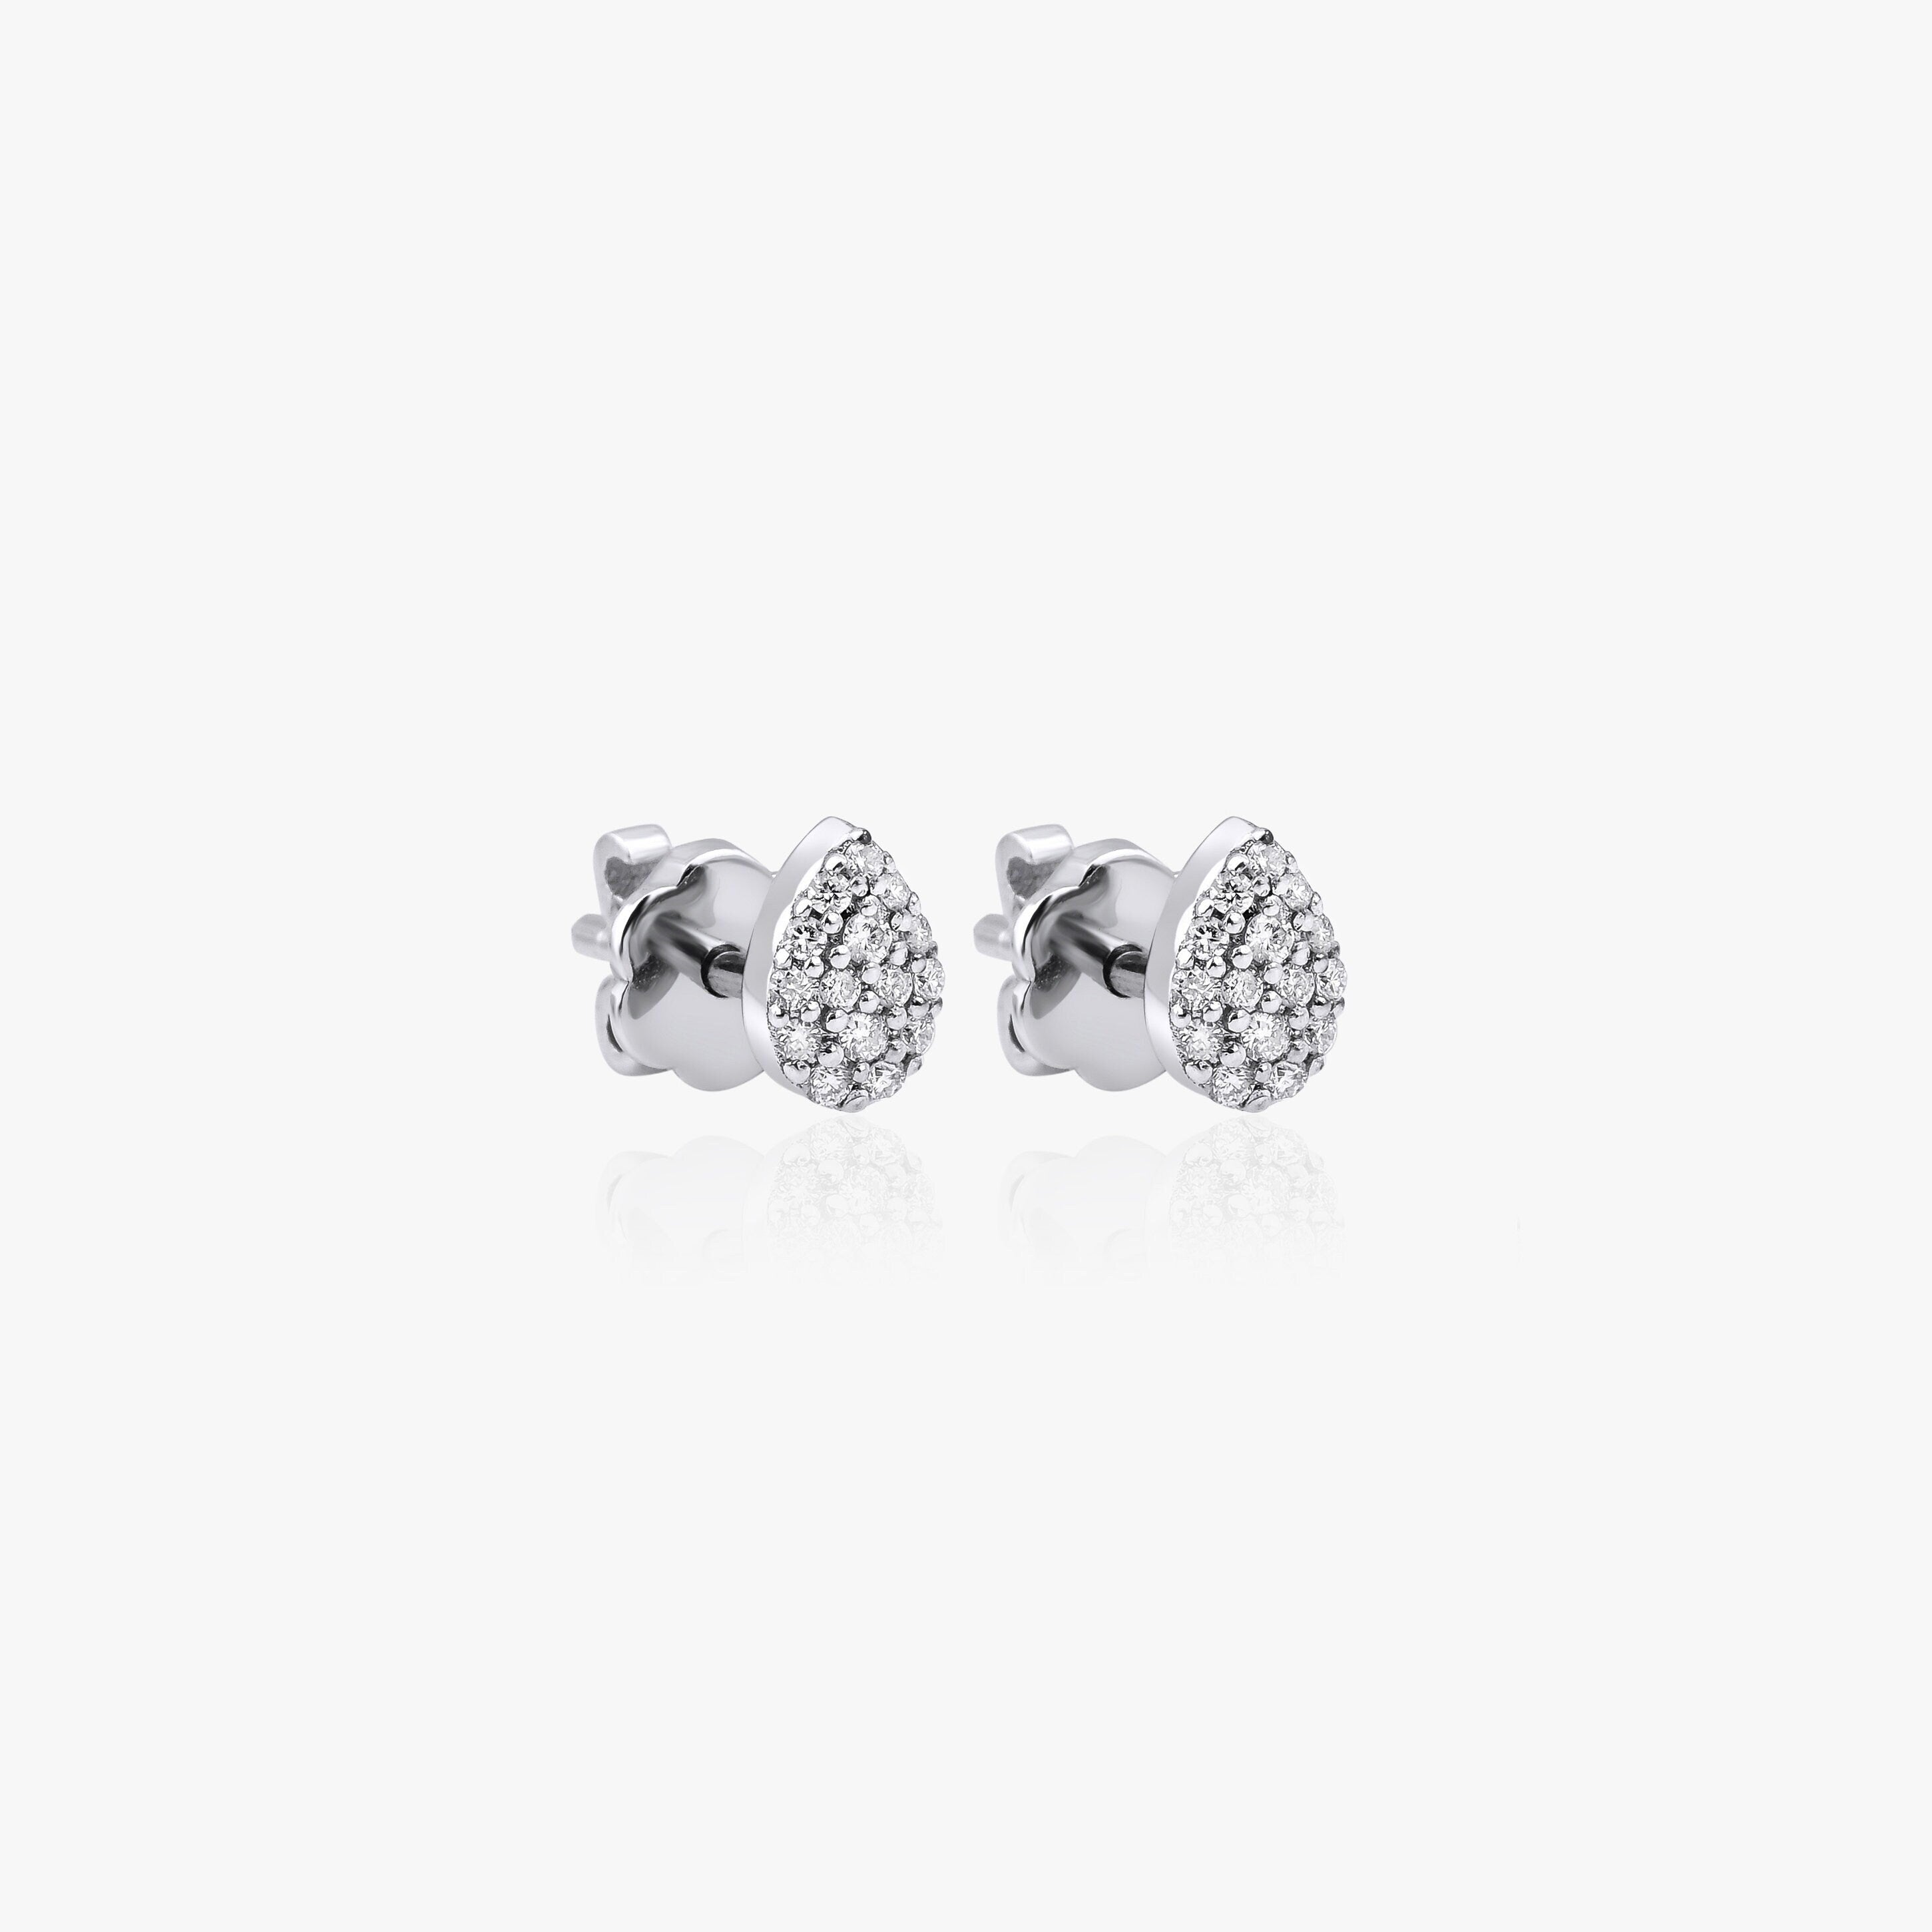 Pave Diamond Earring Available in 14K and 18K Gold